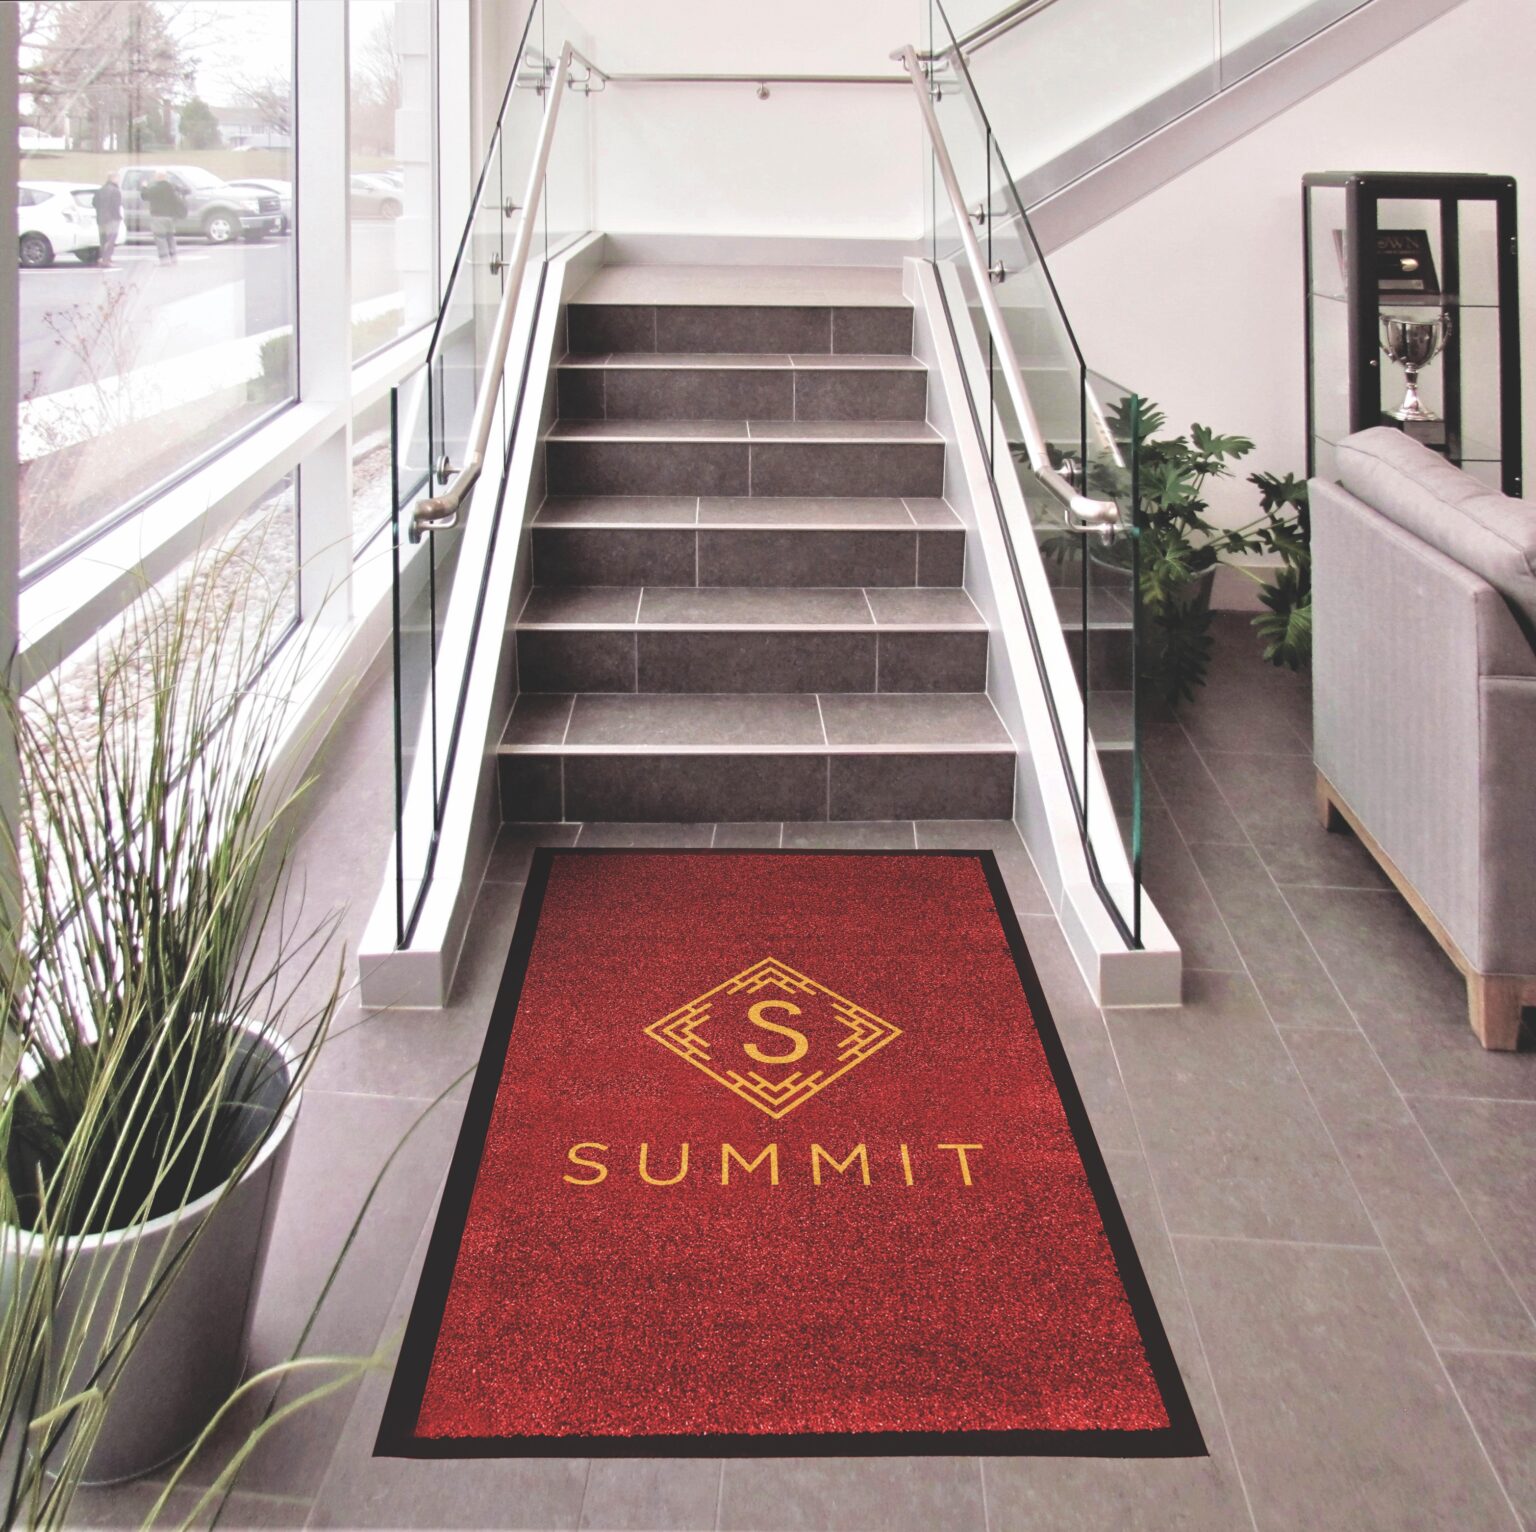 Summit Logo on Red Floor Mat Next to Stairs